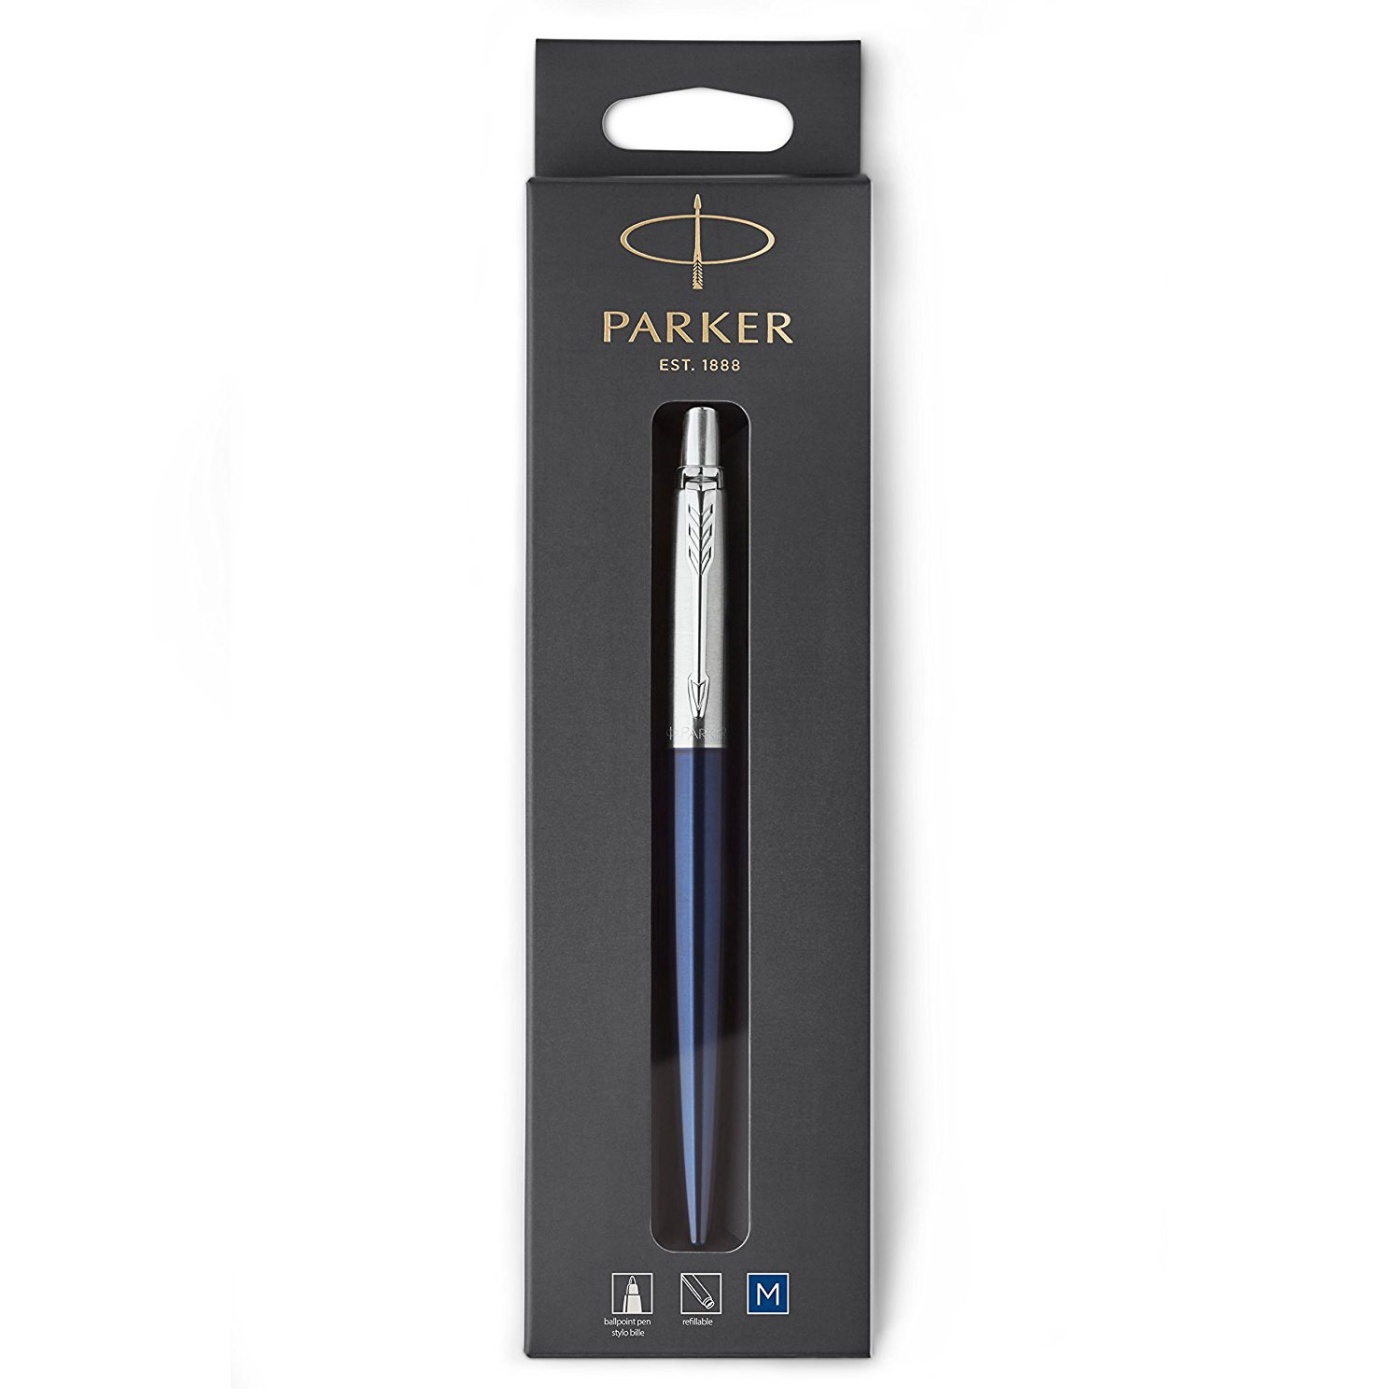 Jotter Royal Blue Ballpoint in the group Pens / Fine Writing / Ballpoint Pens at Pen Store (104812)